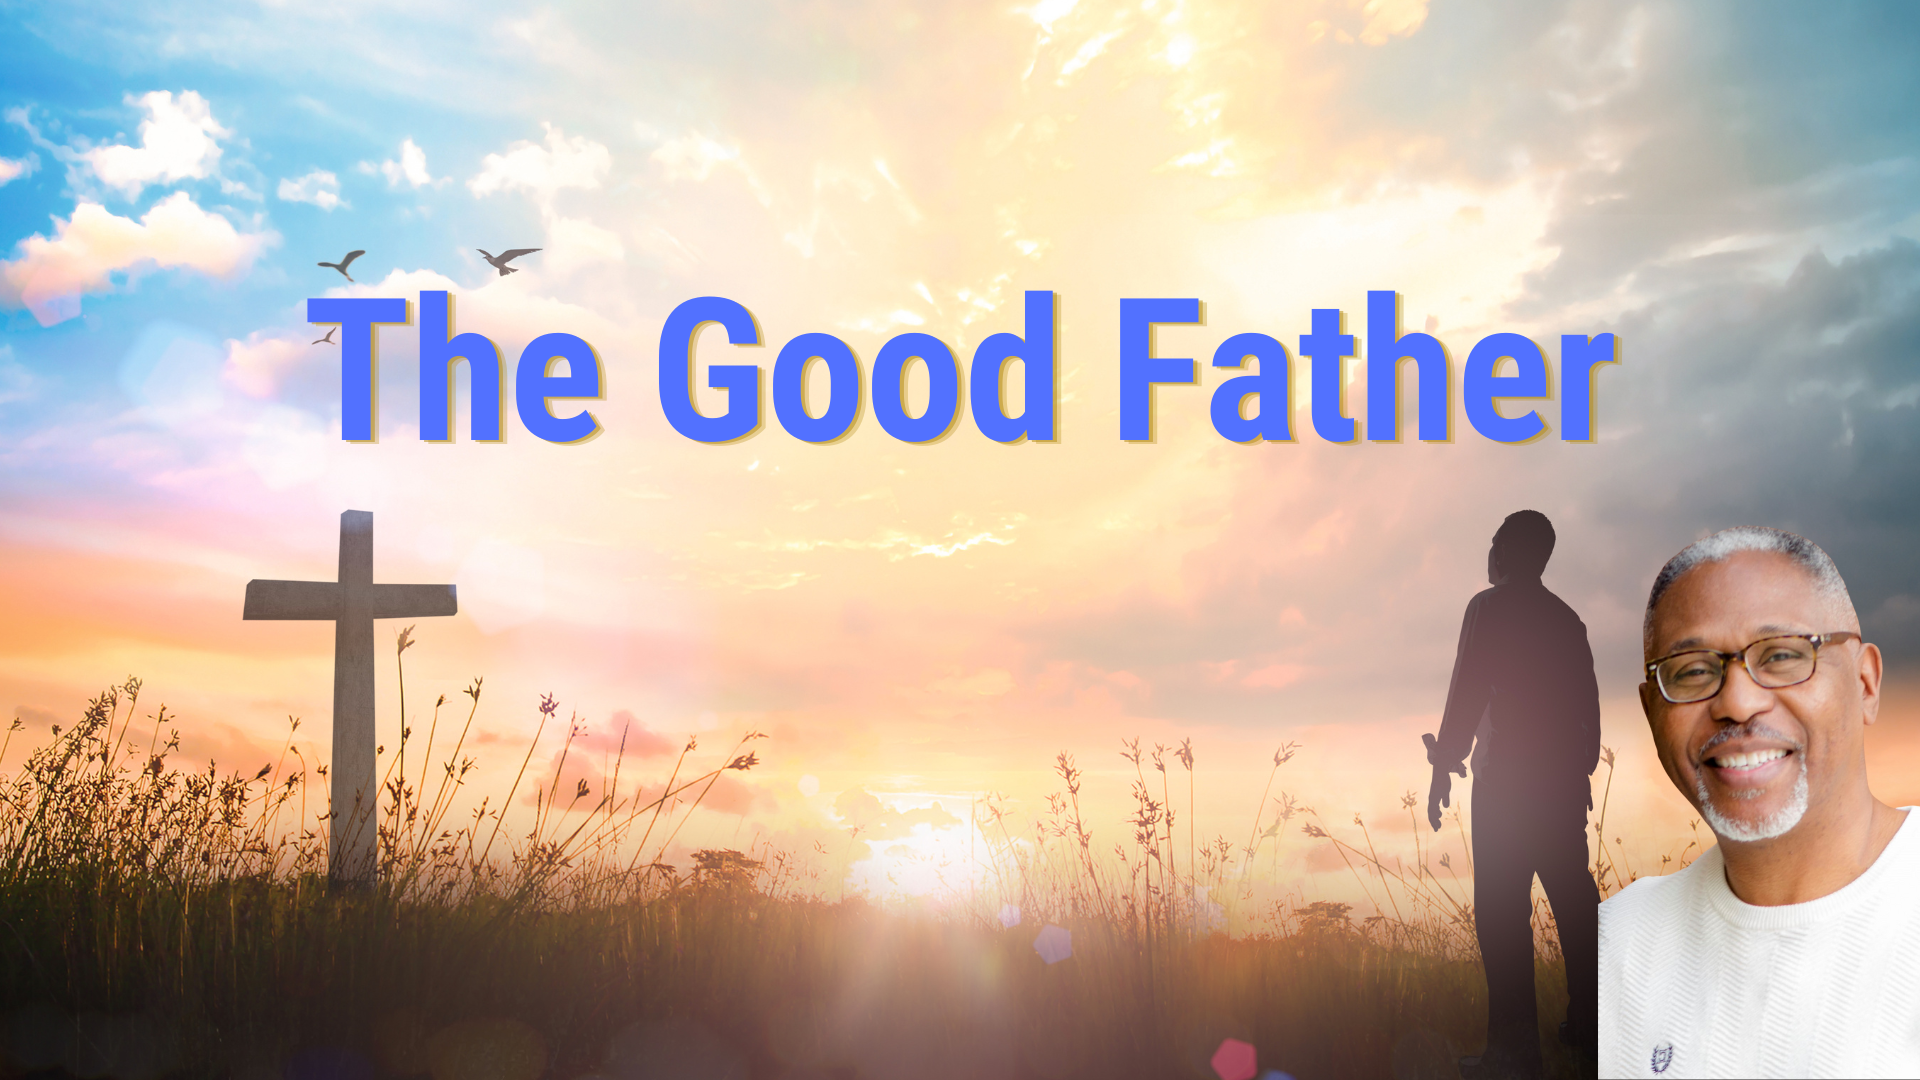 The Good Father head image